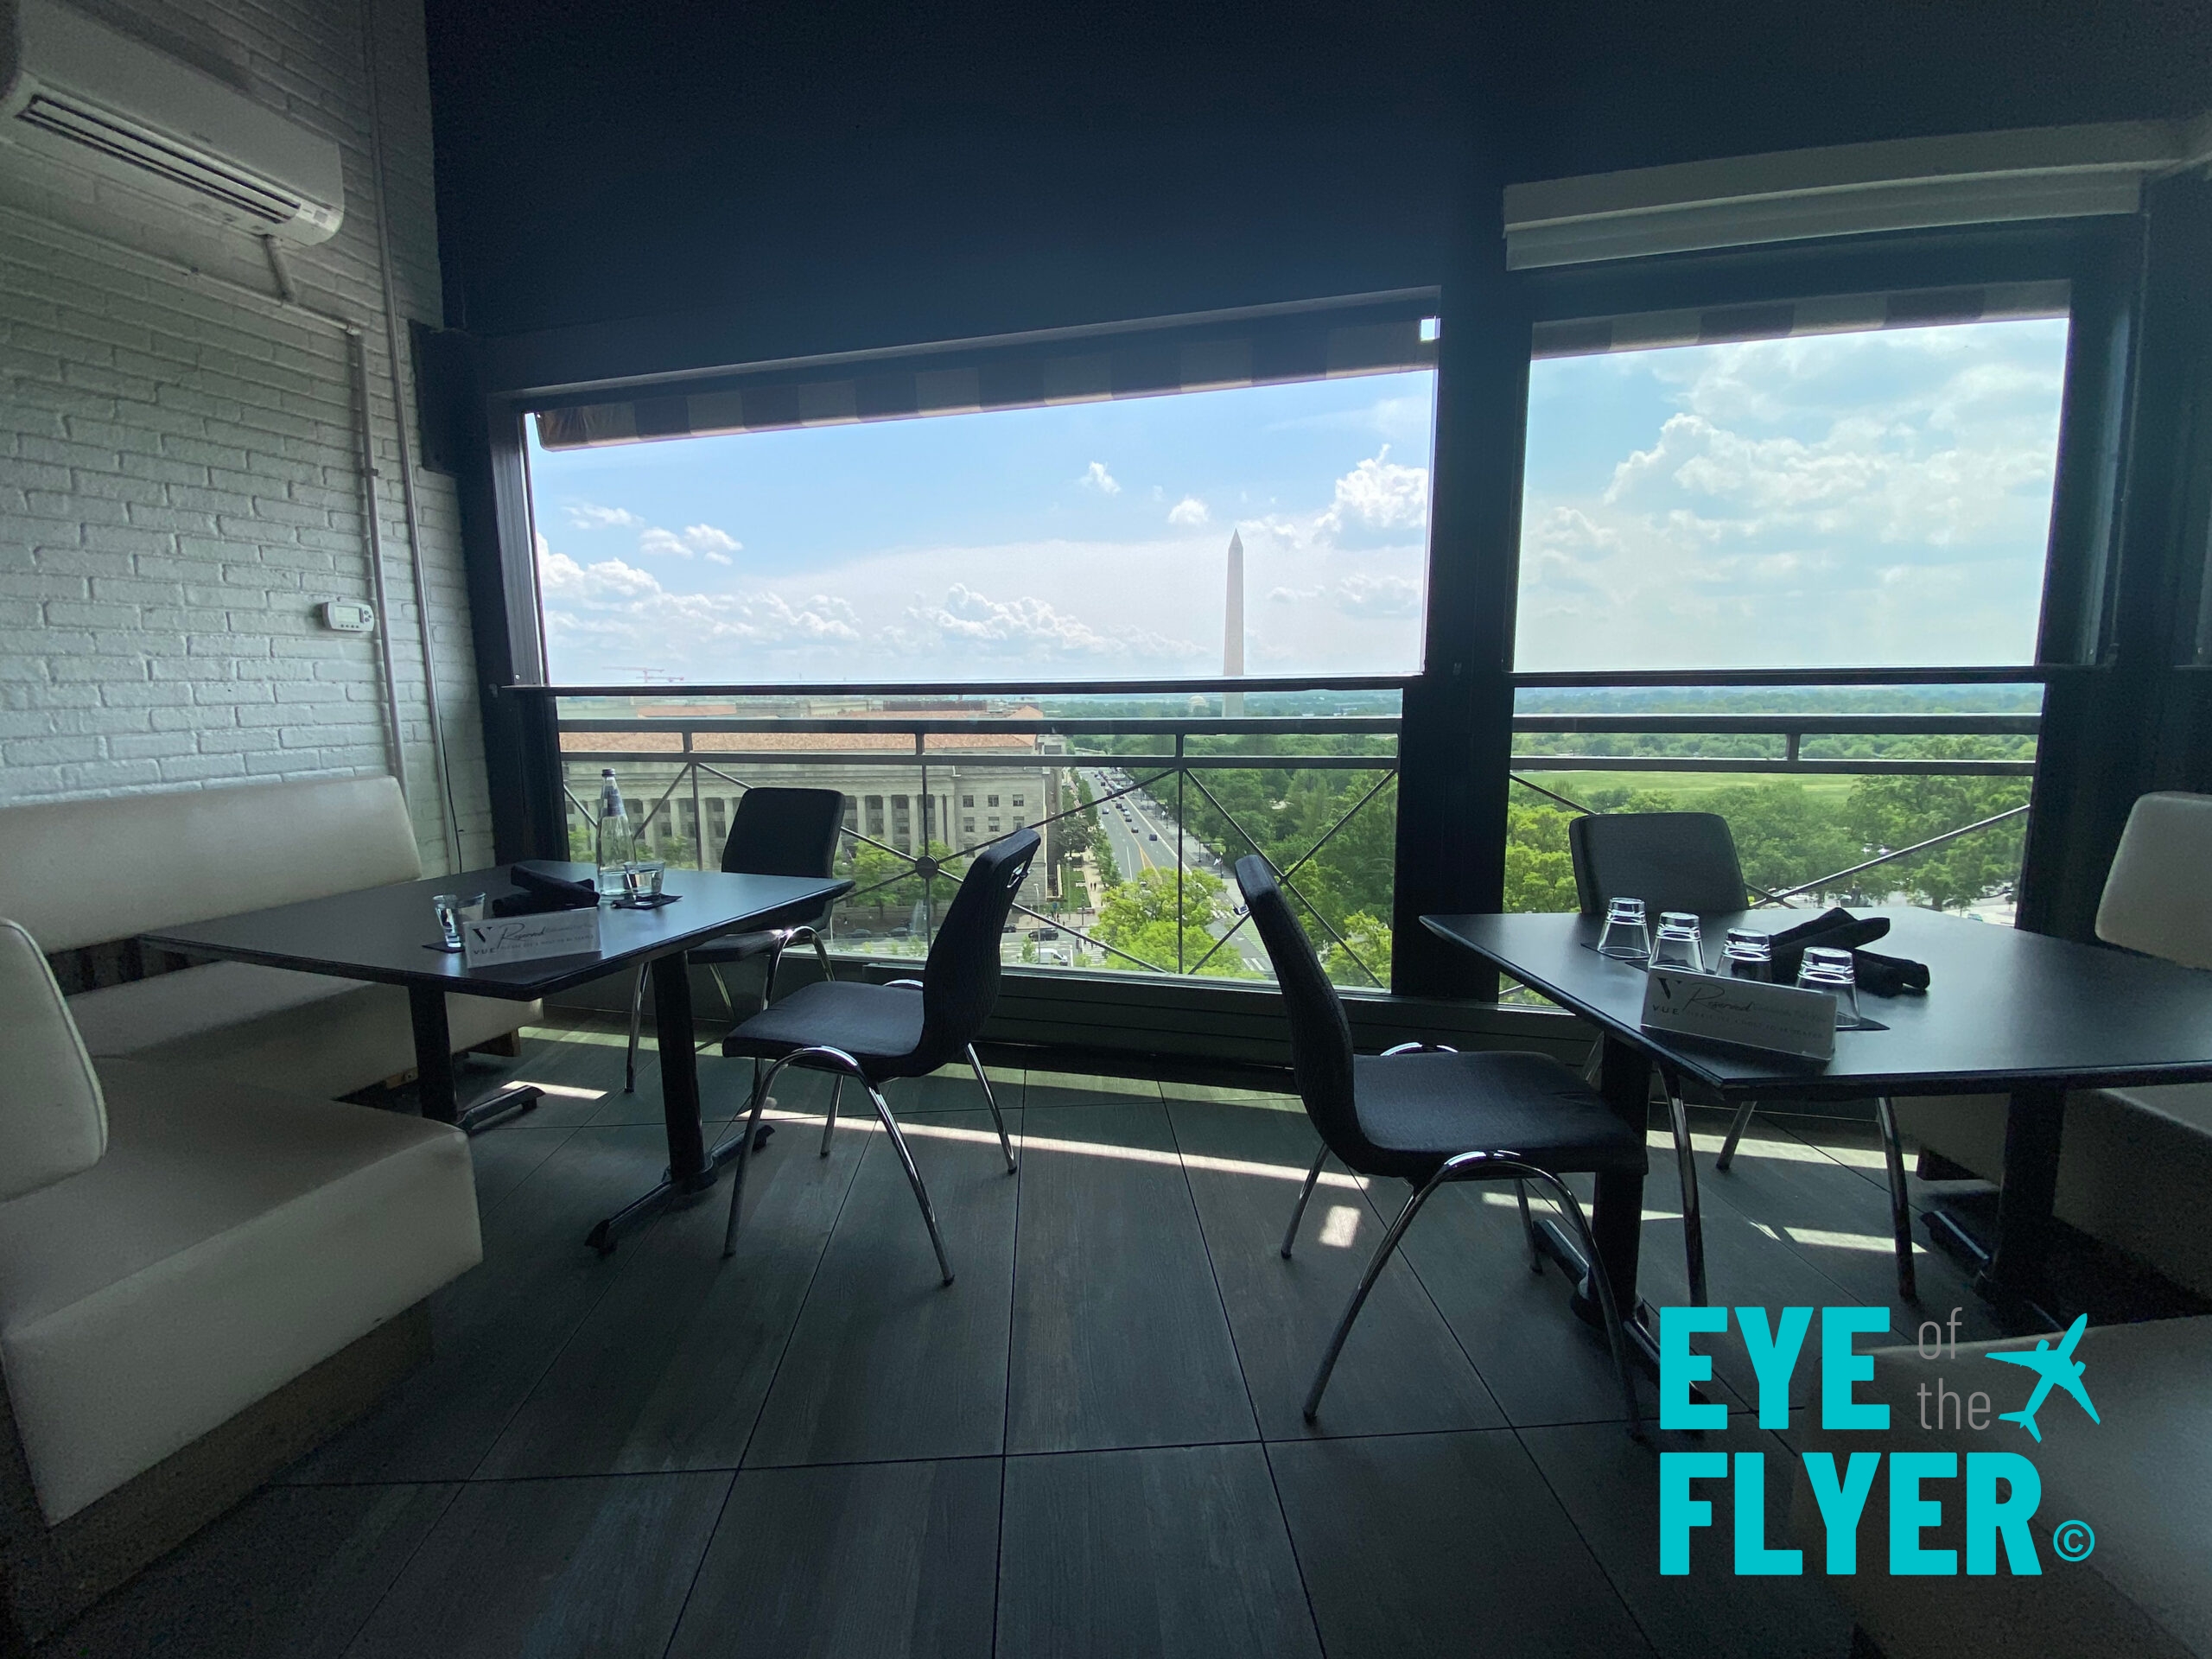 One of the Best Lunches Ever - with Great Views in Washington, D.C. - Eye of the Flyer